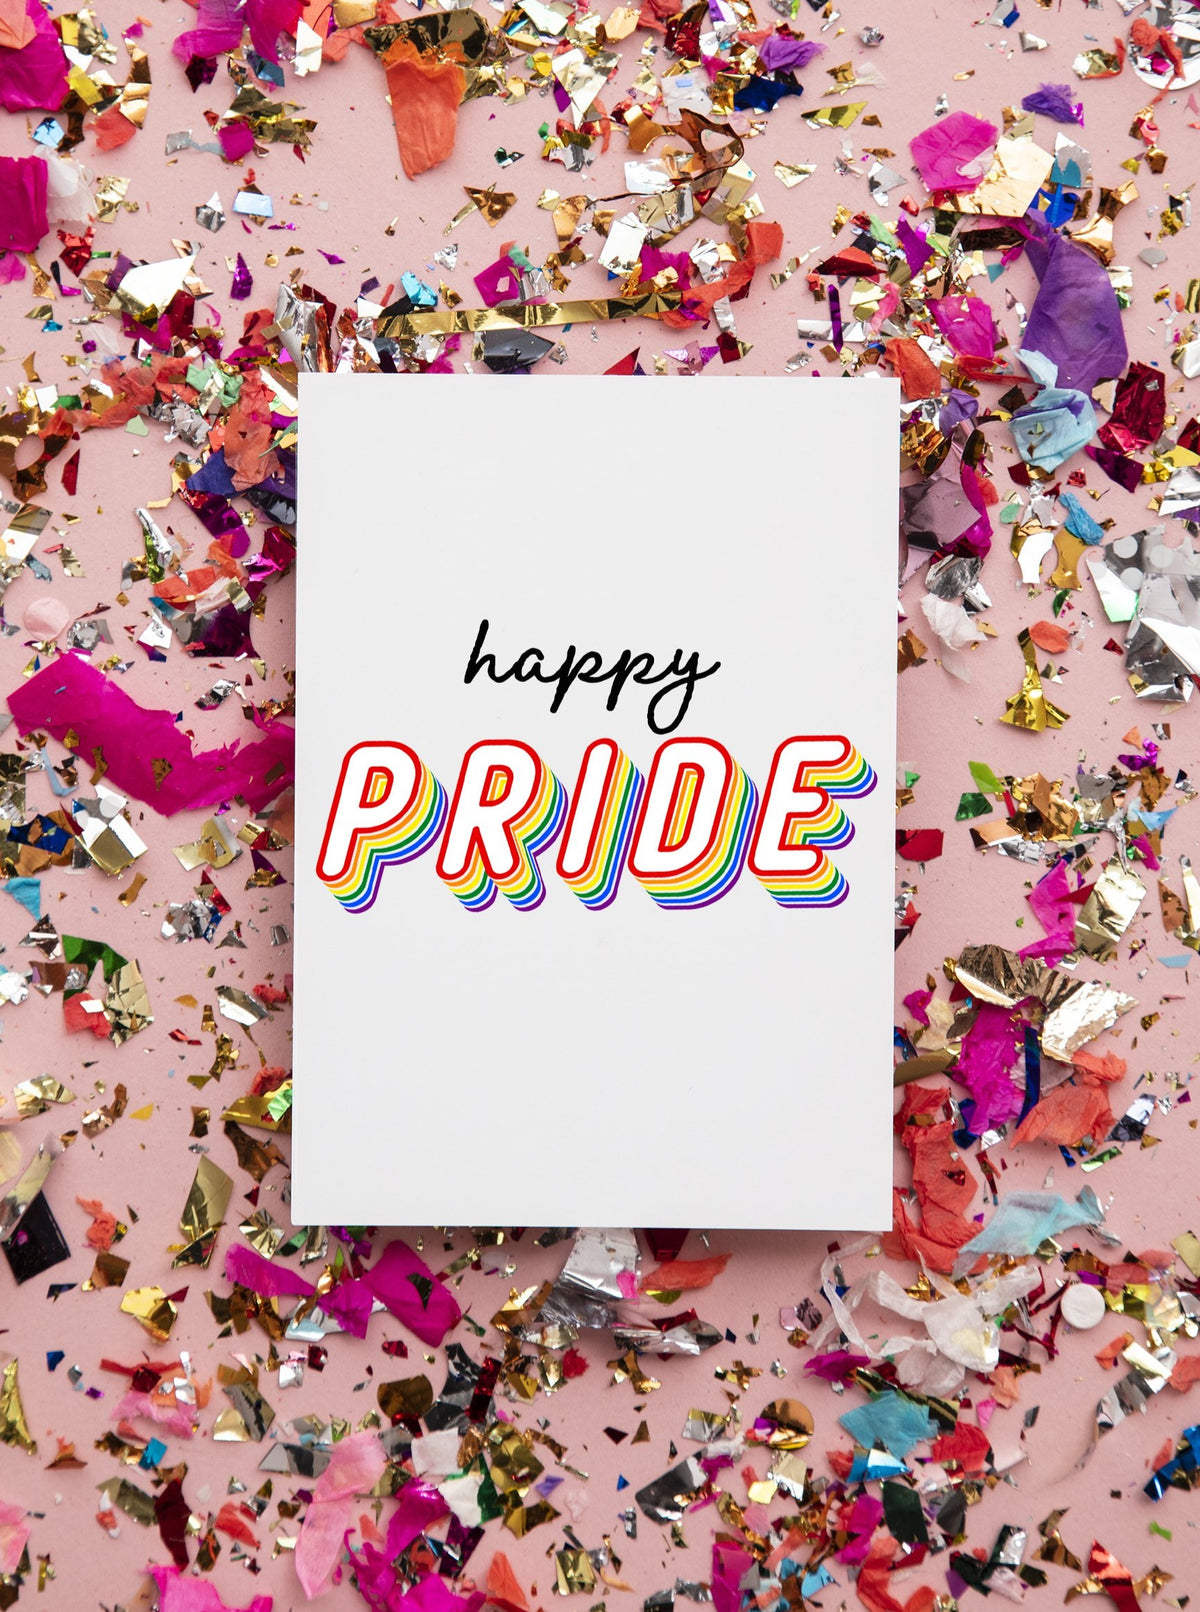 Happy Pride LGBTQ Rainbow Greeting Card,LGBTQ Pride Card,Gay Pride Rainbow Card,Celebrate Pride Month,Pride Month Card, Made in USA Happy is in black lettering and Pride is in rainbow color fashion